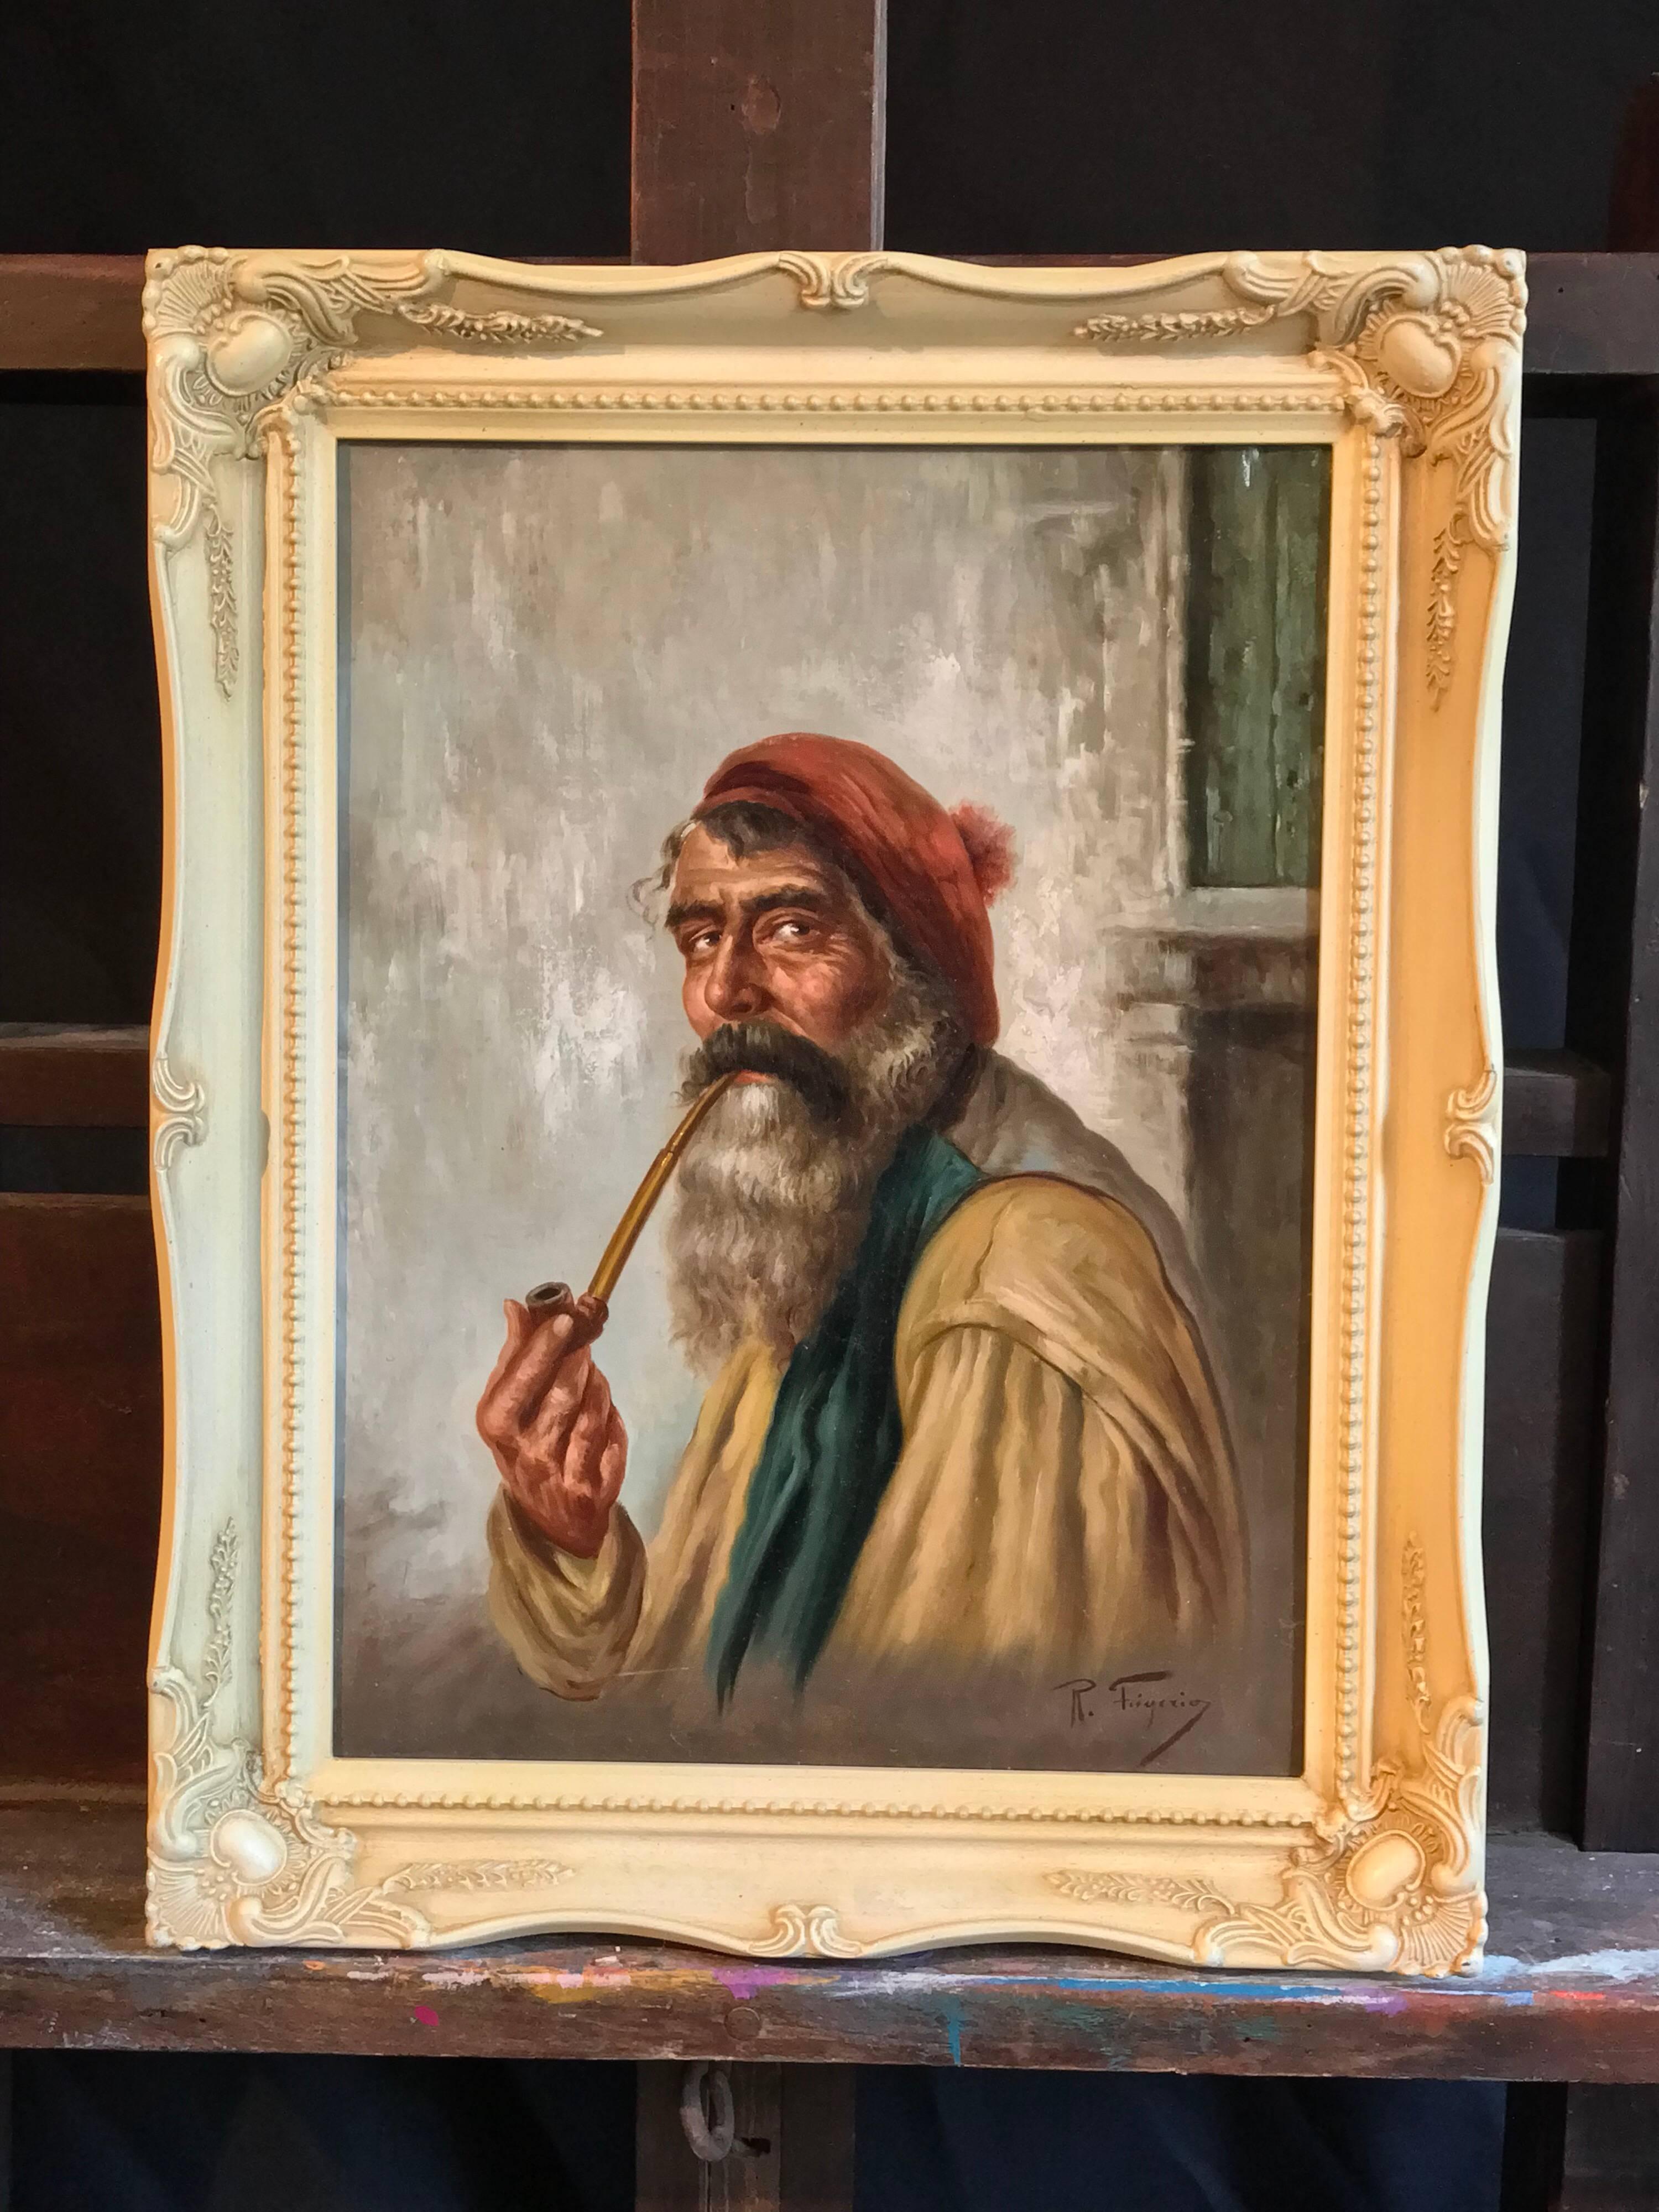 Italian Pipe Smoker, Signed Antique oil painting on canvas - Painting by Raffaele Frigerio